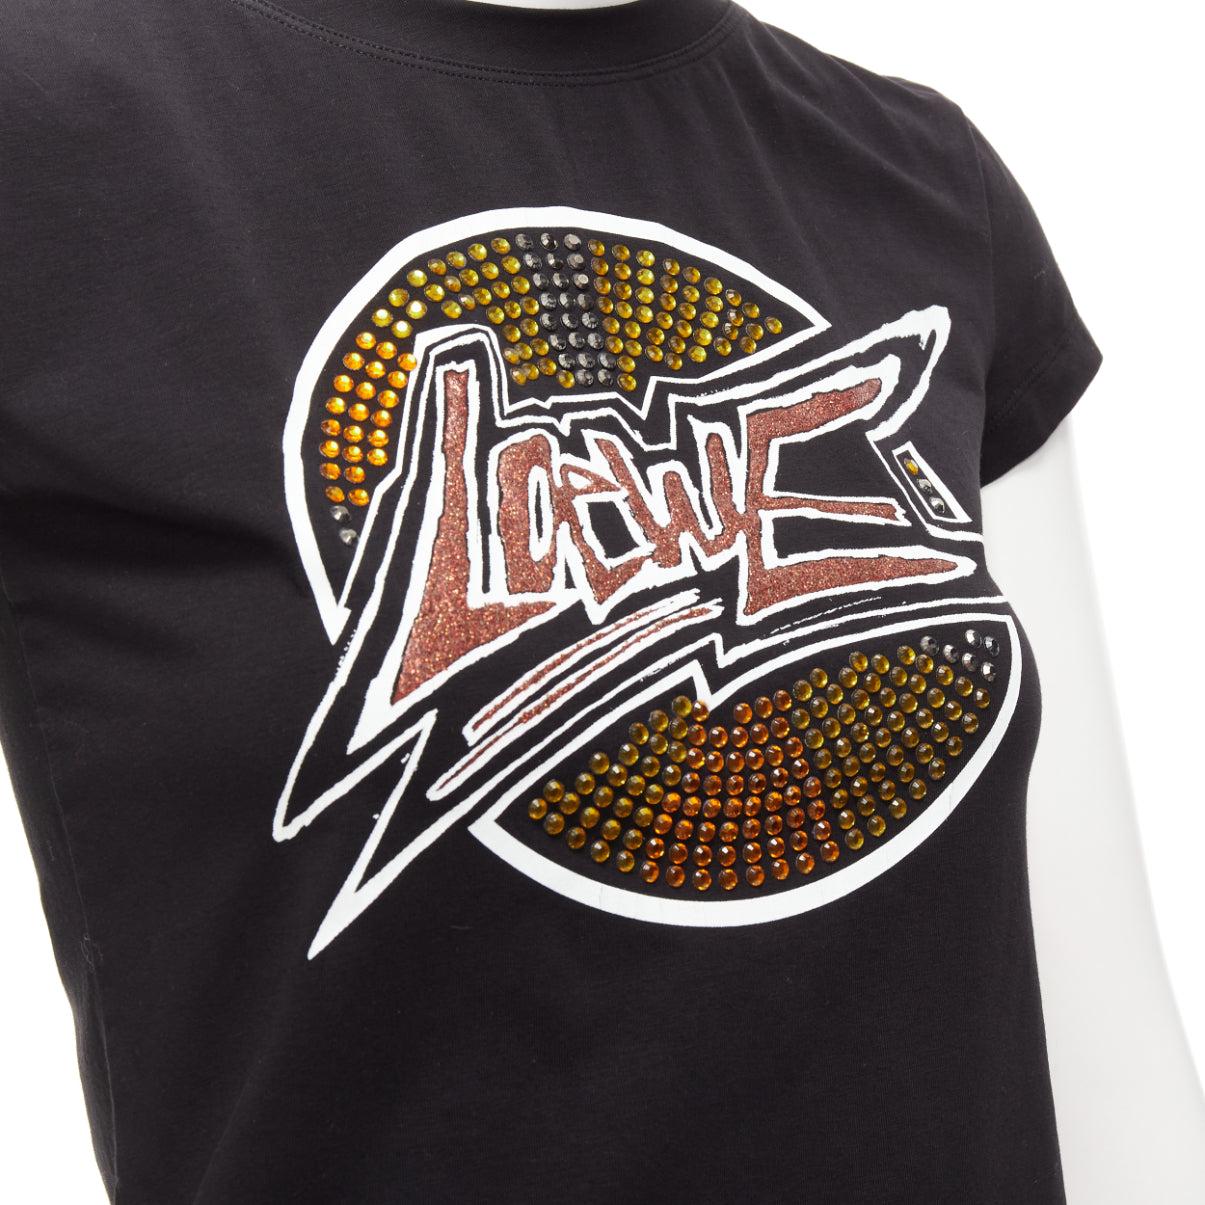 LOEWE black orange glass crystal red glitter logo cotton blend tshirt XS
Reference: AAWC/A01116
Brand: Loewe
Designer: JW Anderson
Material: Cotton, Blend, Glass
Color: Black, Orange
Pattern: Crystals
Closure: Pullover
Made in: